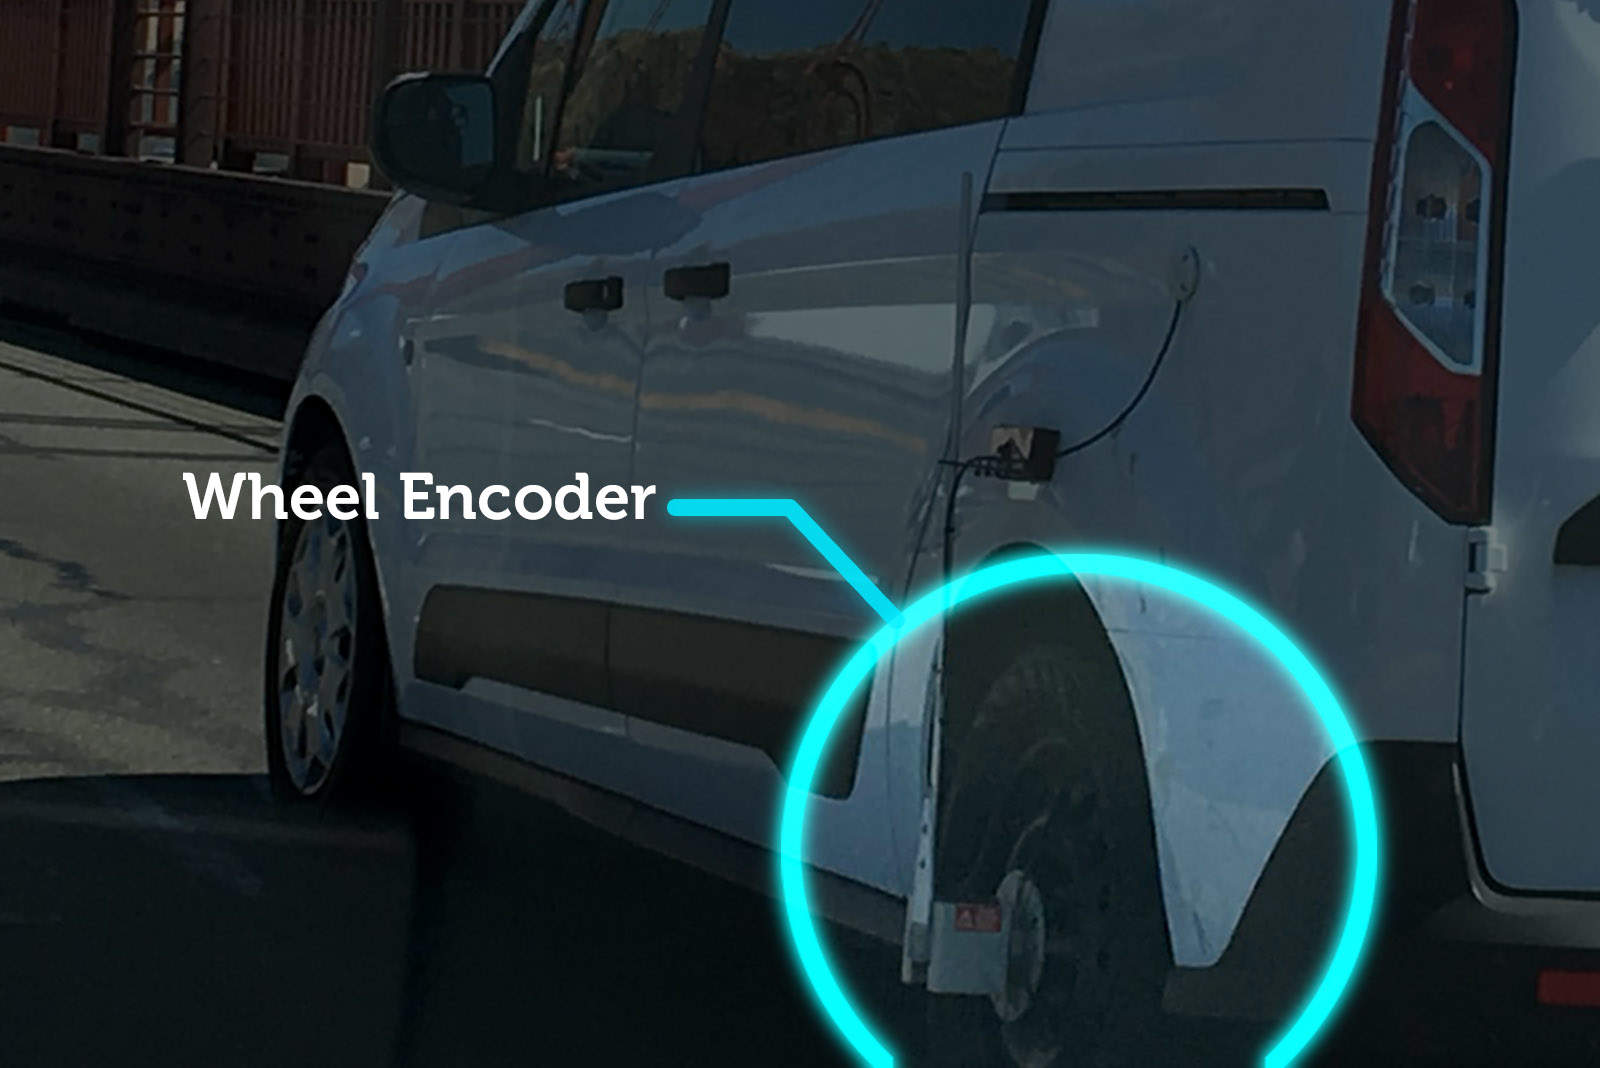 The wheel encoder and GPS keep track of the vehicle's movements and provide "ground truth" to the maps being generated by other sensors.